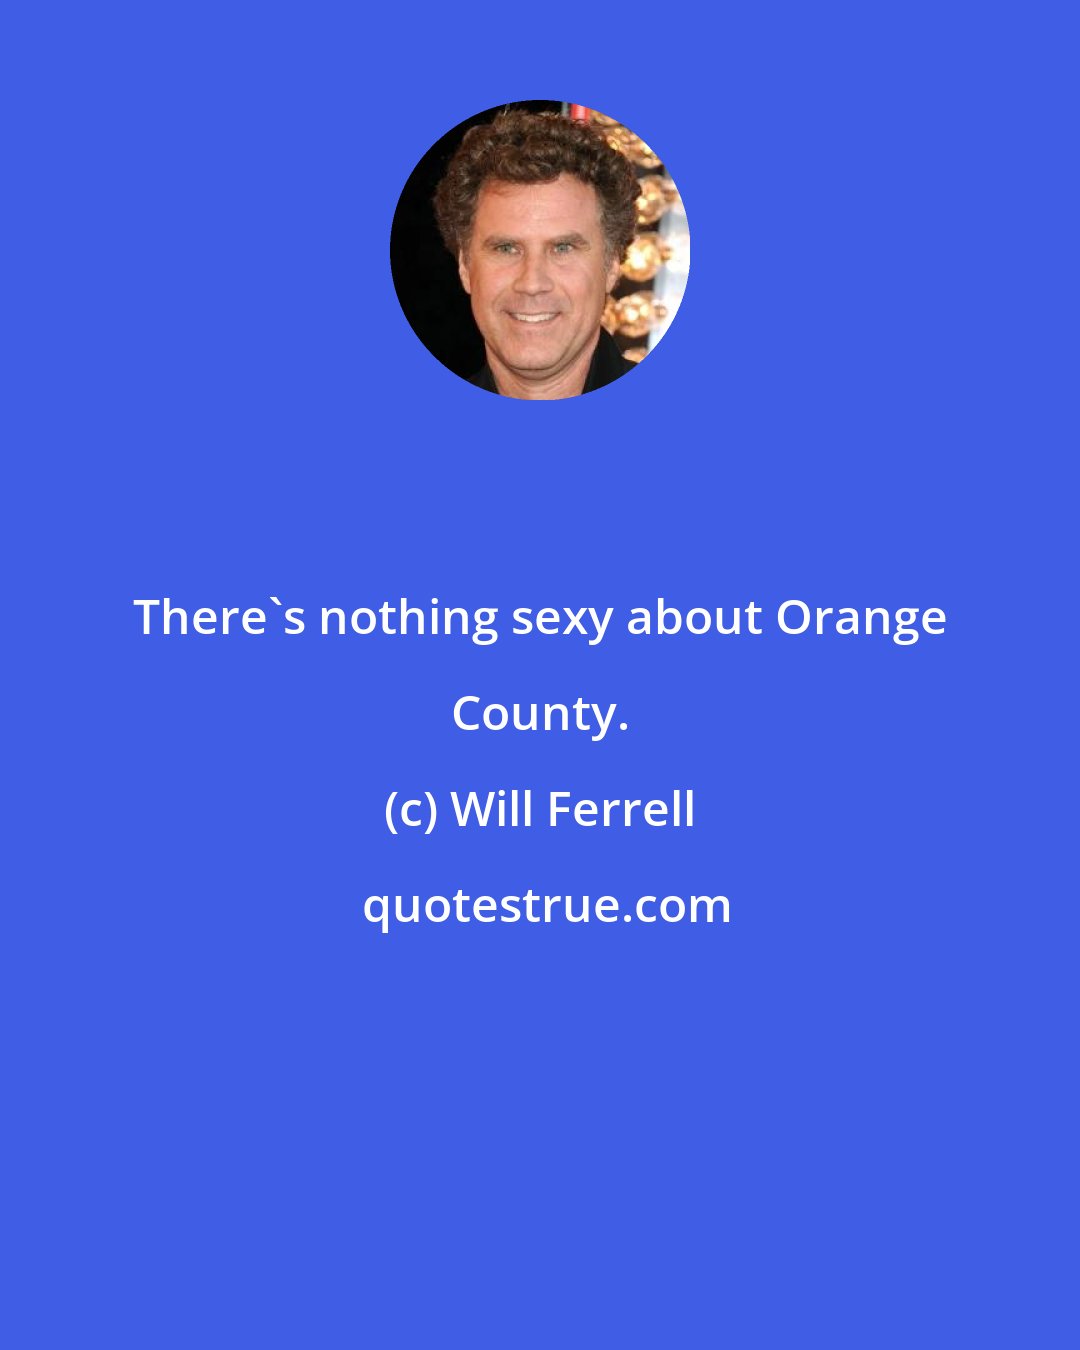 Will Ferrell: There's nothing sexy about Orange County.